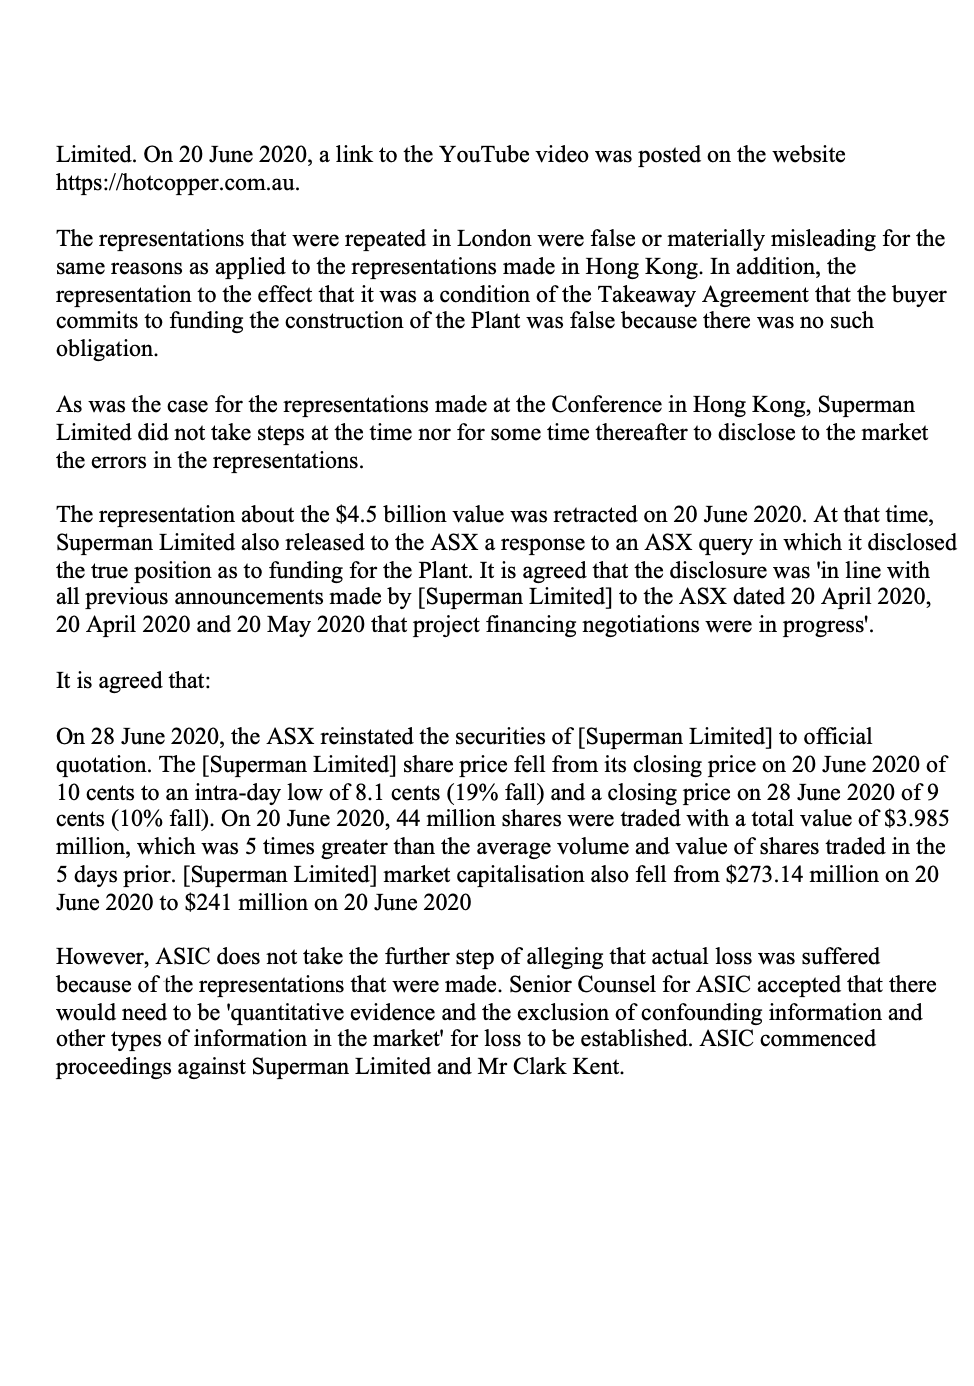 Limited. On 20 June 2020, a link to the YouTube video was posted on the website
https://hotcopper.com.au.
The representations that were repeated in London were false or materially misleading for the
same reasons as applied to the representations made in Hong Kong. In addition, the
representation to the effect that it was a condition of the Takeaway Agreement that the buyer
commits to funding the construction of the Plant was false because there was no such
obligation.
As was the case for the representations made at the Conference in Hong Kong, Superman
Limited did not take steps at the time nor for some time thereafter to disclose to the market
the errors in the repres ions.
The representation about the $4.5 billion value was retracted on 20 June 2020. At that time,
Superman Limited also released to the ASX a response to an ASX query in which it disclosed
the true position as to funding for the Plant. It is agreed that the disclosure was 'in line with
all previous announcements made by [Superman Limited] to the ASX dated 20 April 2020,
20 April 2020 and 20 May 2020 that project financing negotiations were in progress'.
It is agreed that:
On 28 June 2020, the ASX reinstated the securities of [Superman Limited] to official
quotation. The [Superman Limited] share price fell from its closing price on 20 June 2020 of
10 cents to an intra-day low of 8.1 cents (19% fall) and a closing price on 28 June 2020 of 9
cents (10% fall). On 20 June 2020, 44 million shares were traded with a total value of $3.985
million, which was 5 times greater than the average volume and value of shares traded in the
5 days prior. [Superman Limited] market capitalisation also fell from $273.14 million on 20
June 2020 to $241 million on 20 June 2020
However, ASIC does not take the further step of alleging that actual loss was suffered
because of the representations that were made. Senior Counsel for ASIC accepted that there
would need to be 'quantitative evidence and the exclusion of confounding information and
other types of information in the market' for loss to be established. ASIC commenced
proceedings against Superman Limited and Mr Clark Kent.